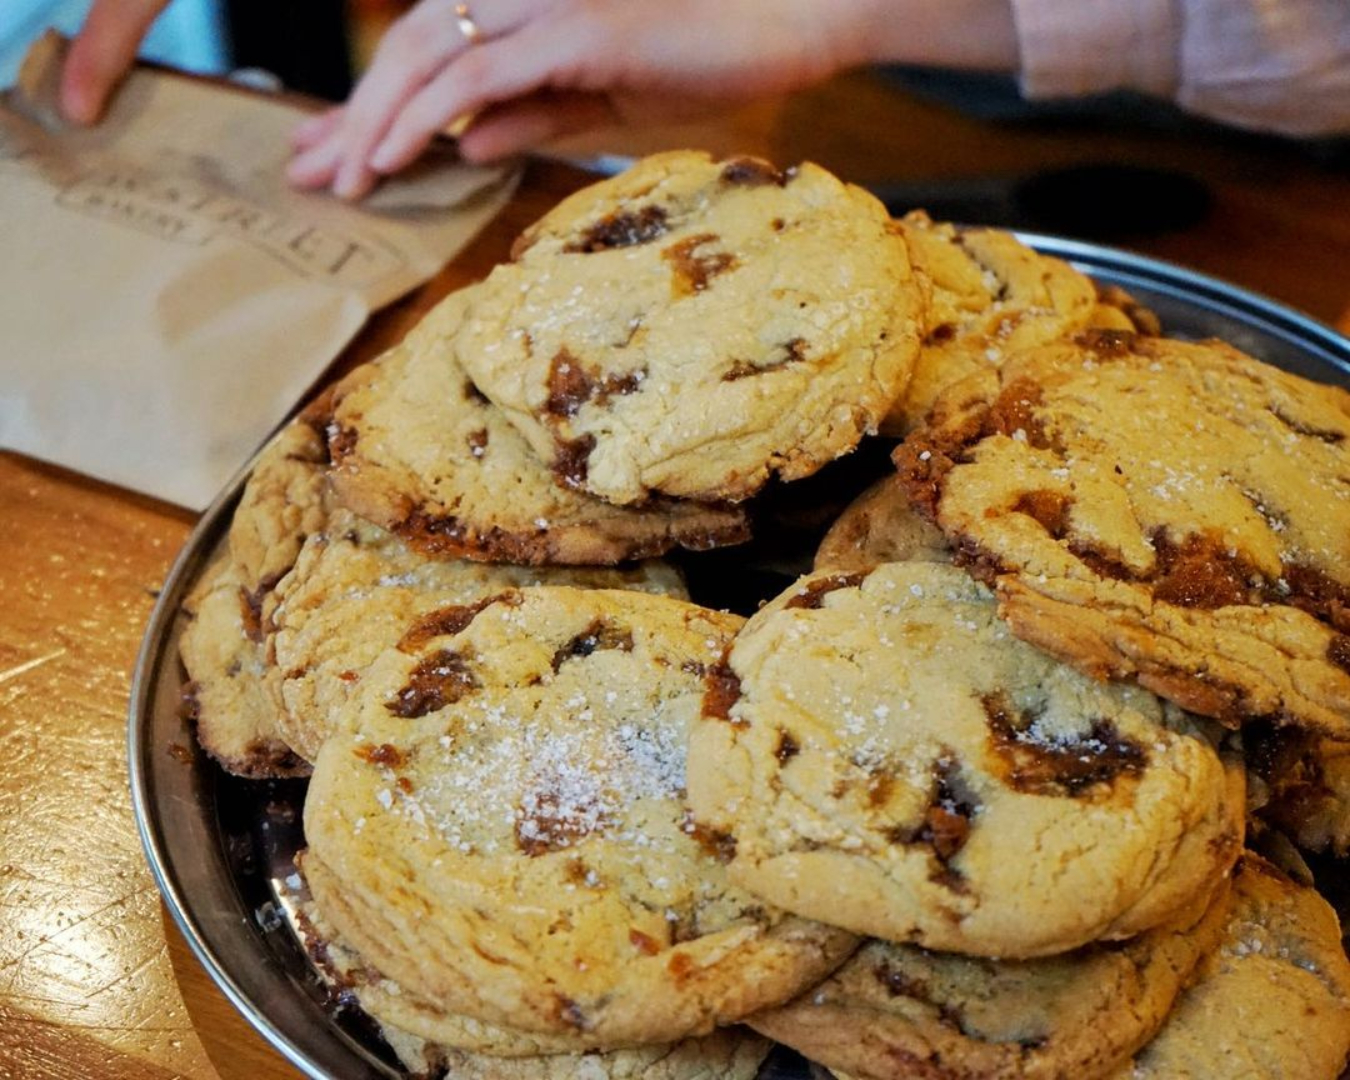 A plate of the beloved Salted Caramel Cookies at Leeds Street Bakery